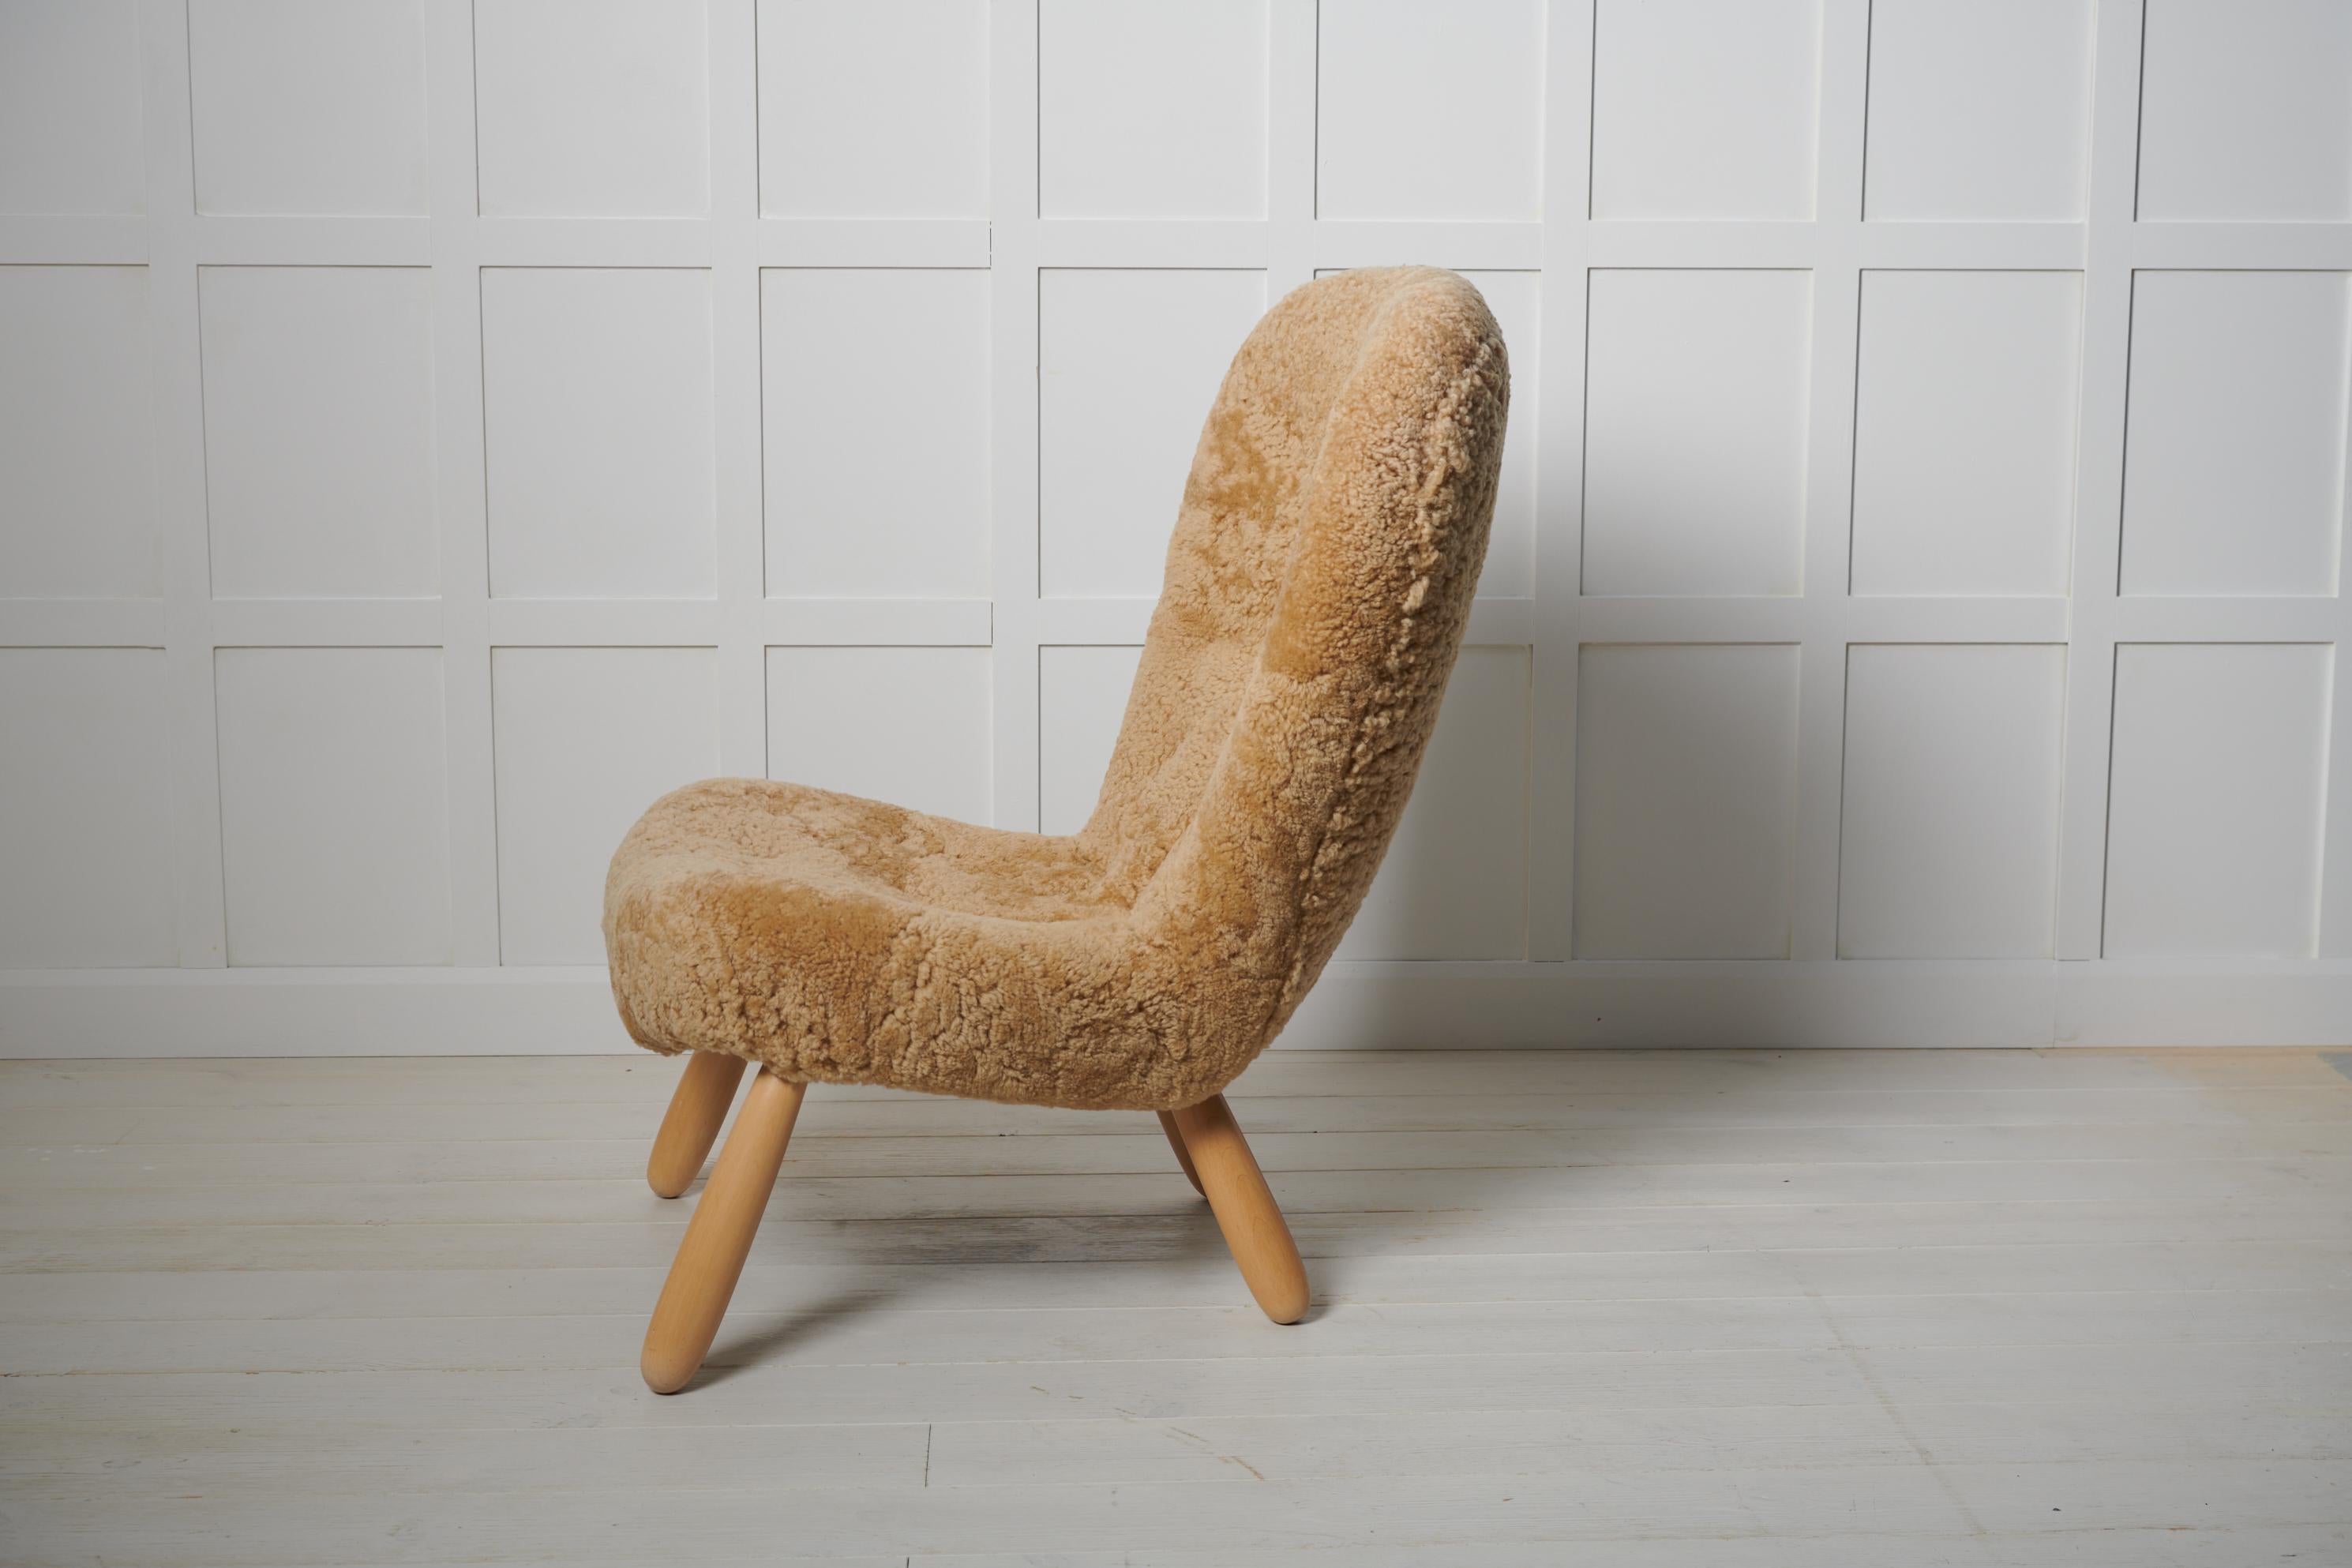 Rare Authentic Scandinavian Modern Clam Chair by Arnold Madsen, Denmark In Good Condition For Sale In Kramfors, SE